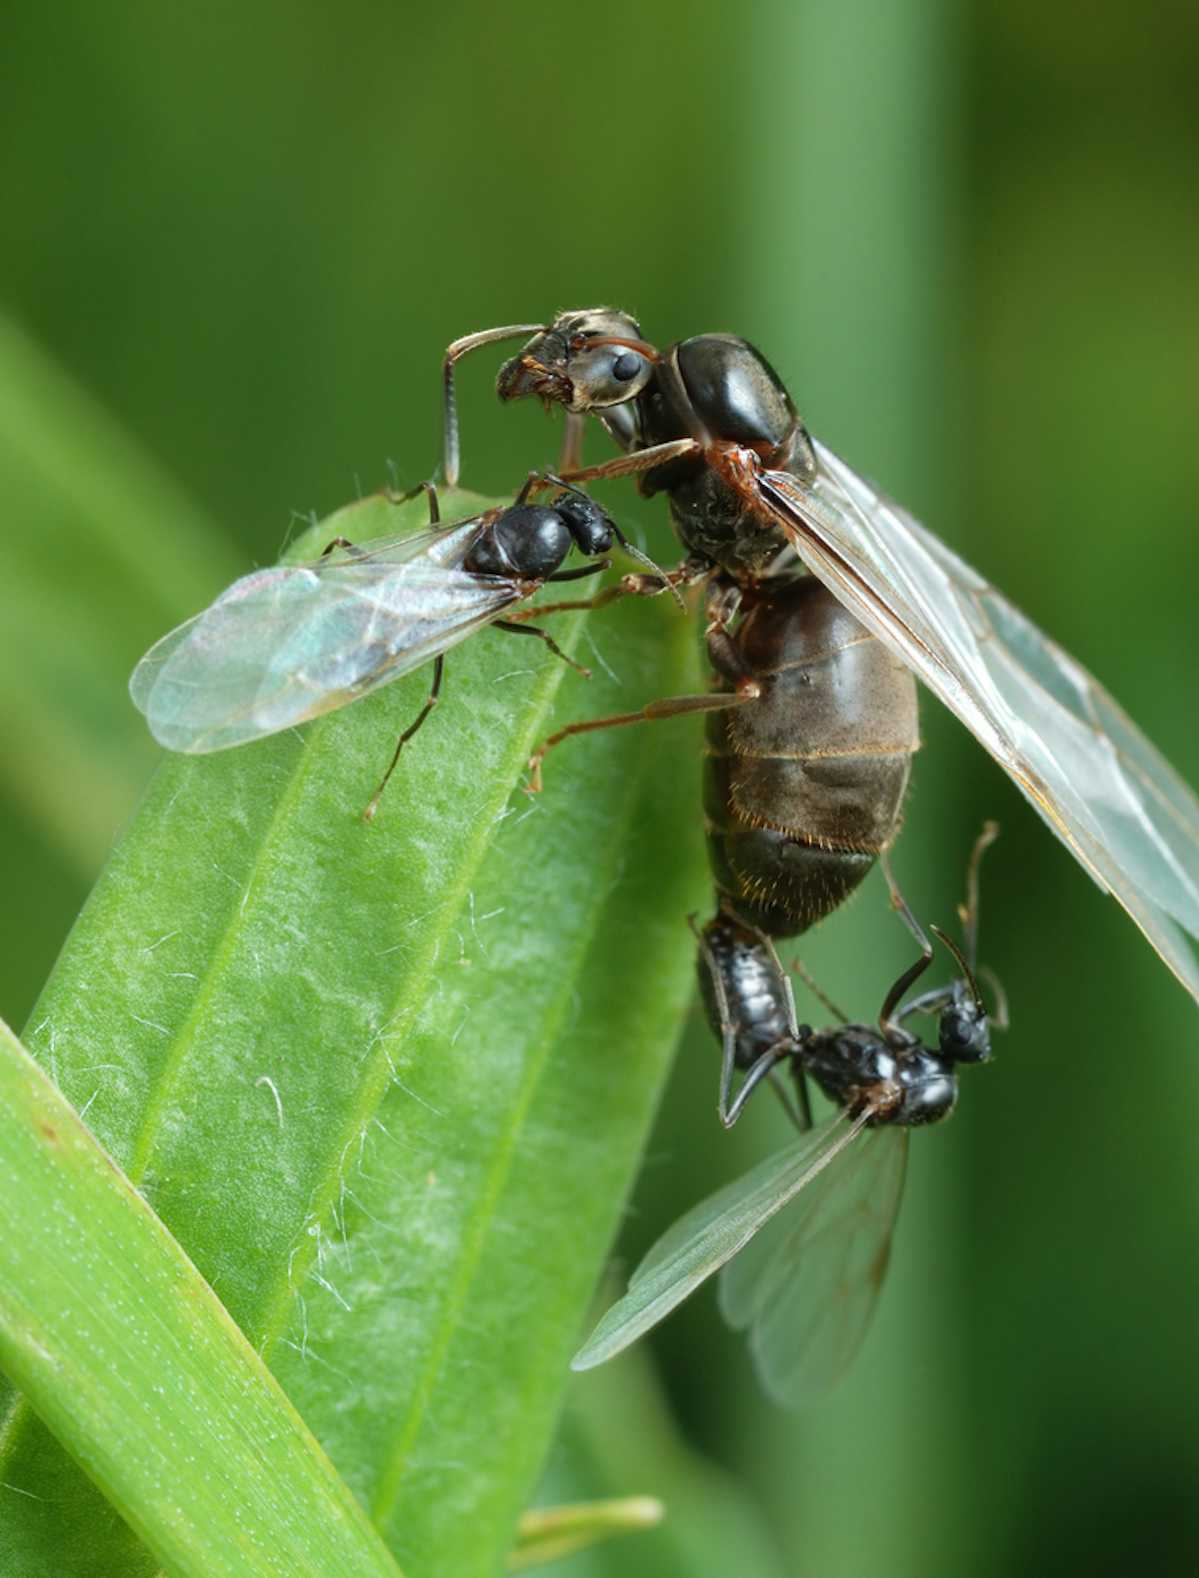 The amazing secrets behind 'flying ant day'